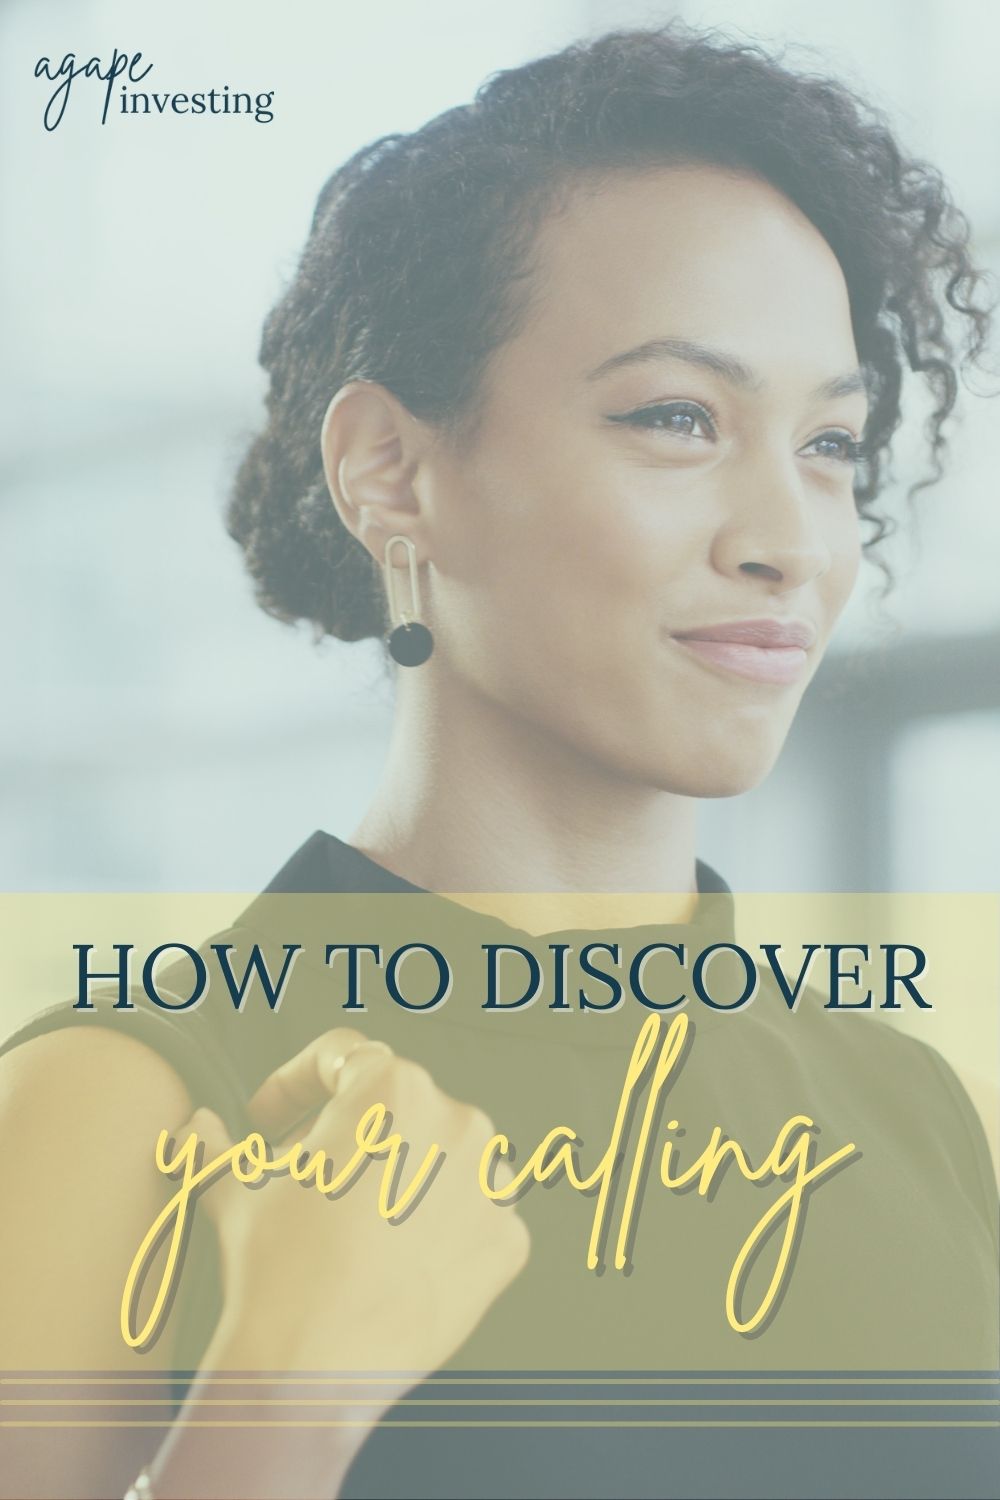 To have a calling means that you need to have a caller. Without anyone calling you to something how can you have a calling? In this article we will look at how to discover your calling. Did you know that you have two types of callings from God? Find out more about what those are and how to discover your individual calling. #calling #discoveryourcalling #whatismycalling #whatismypurpose #findyourpurpose